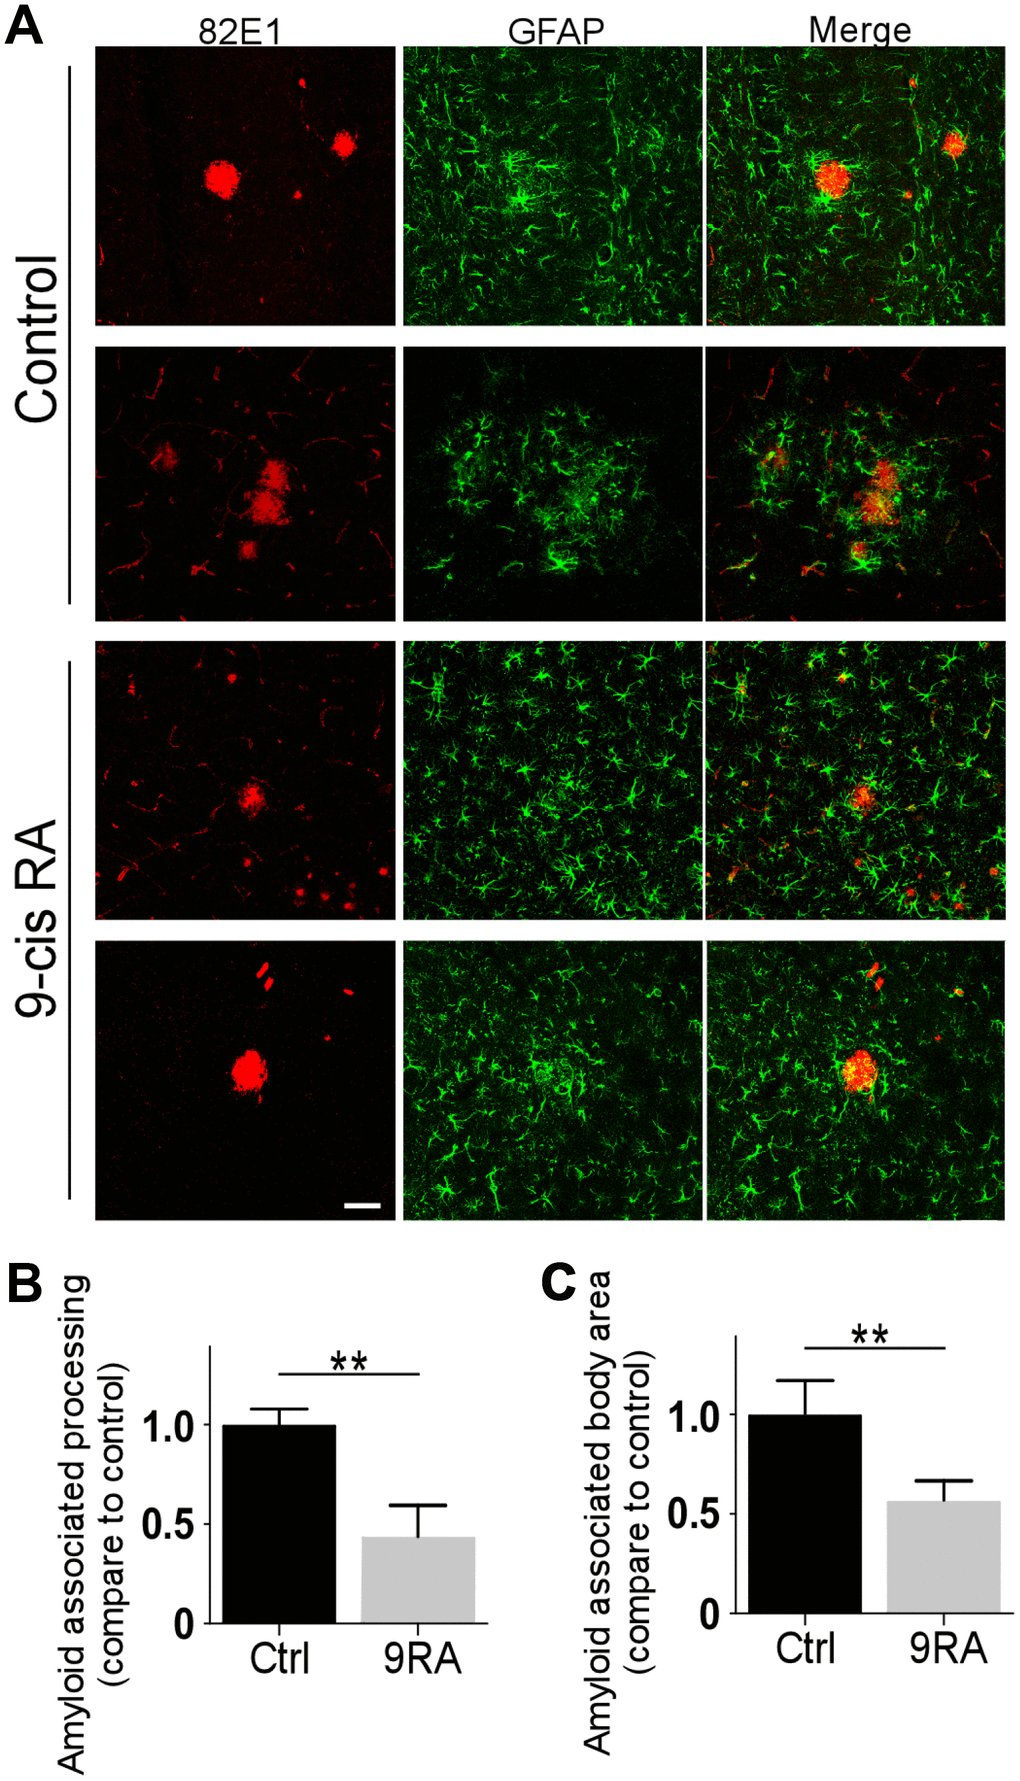 9-cis RA suppressed the activation of astrocytes in APP/PS1 mice. (A) Representative images of GFAP and 82E1 immunochemistry in coronal sections from 7-month-old APP/PS1 animals treated with 9-cis RA (bottom) or vehicle (upper). (B) Quantification of amyloid-associated astrocyte processes compared with the Ctrl (vehicle). (C) Quantification of amyloid-associated astrocyte bodies compared with the Ctrl (vehicle). Scale bars, 50 μm. Data represent the mean ± SEM (n=6). **, p